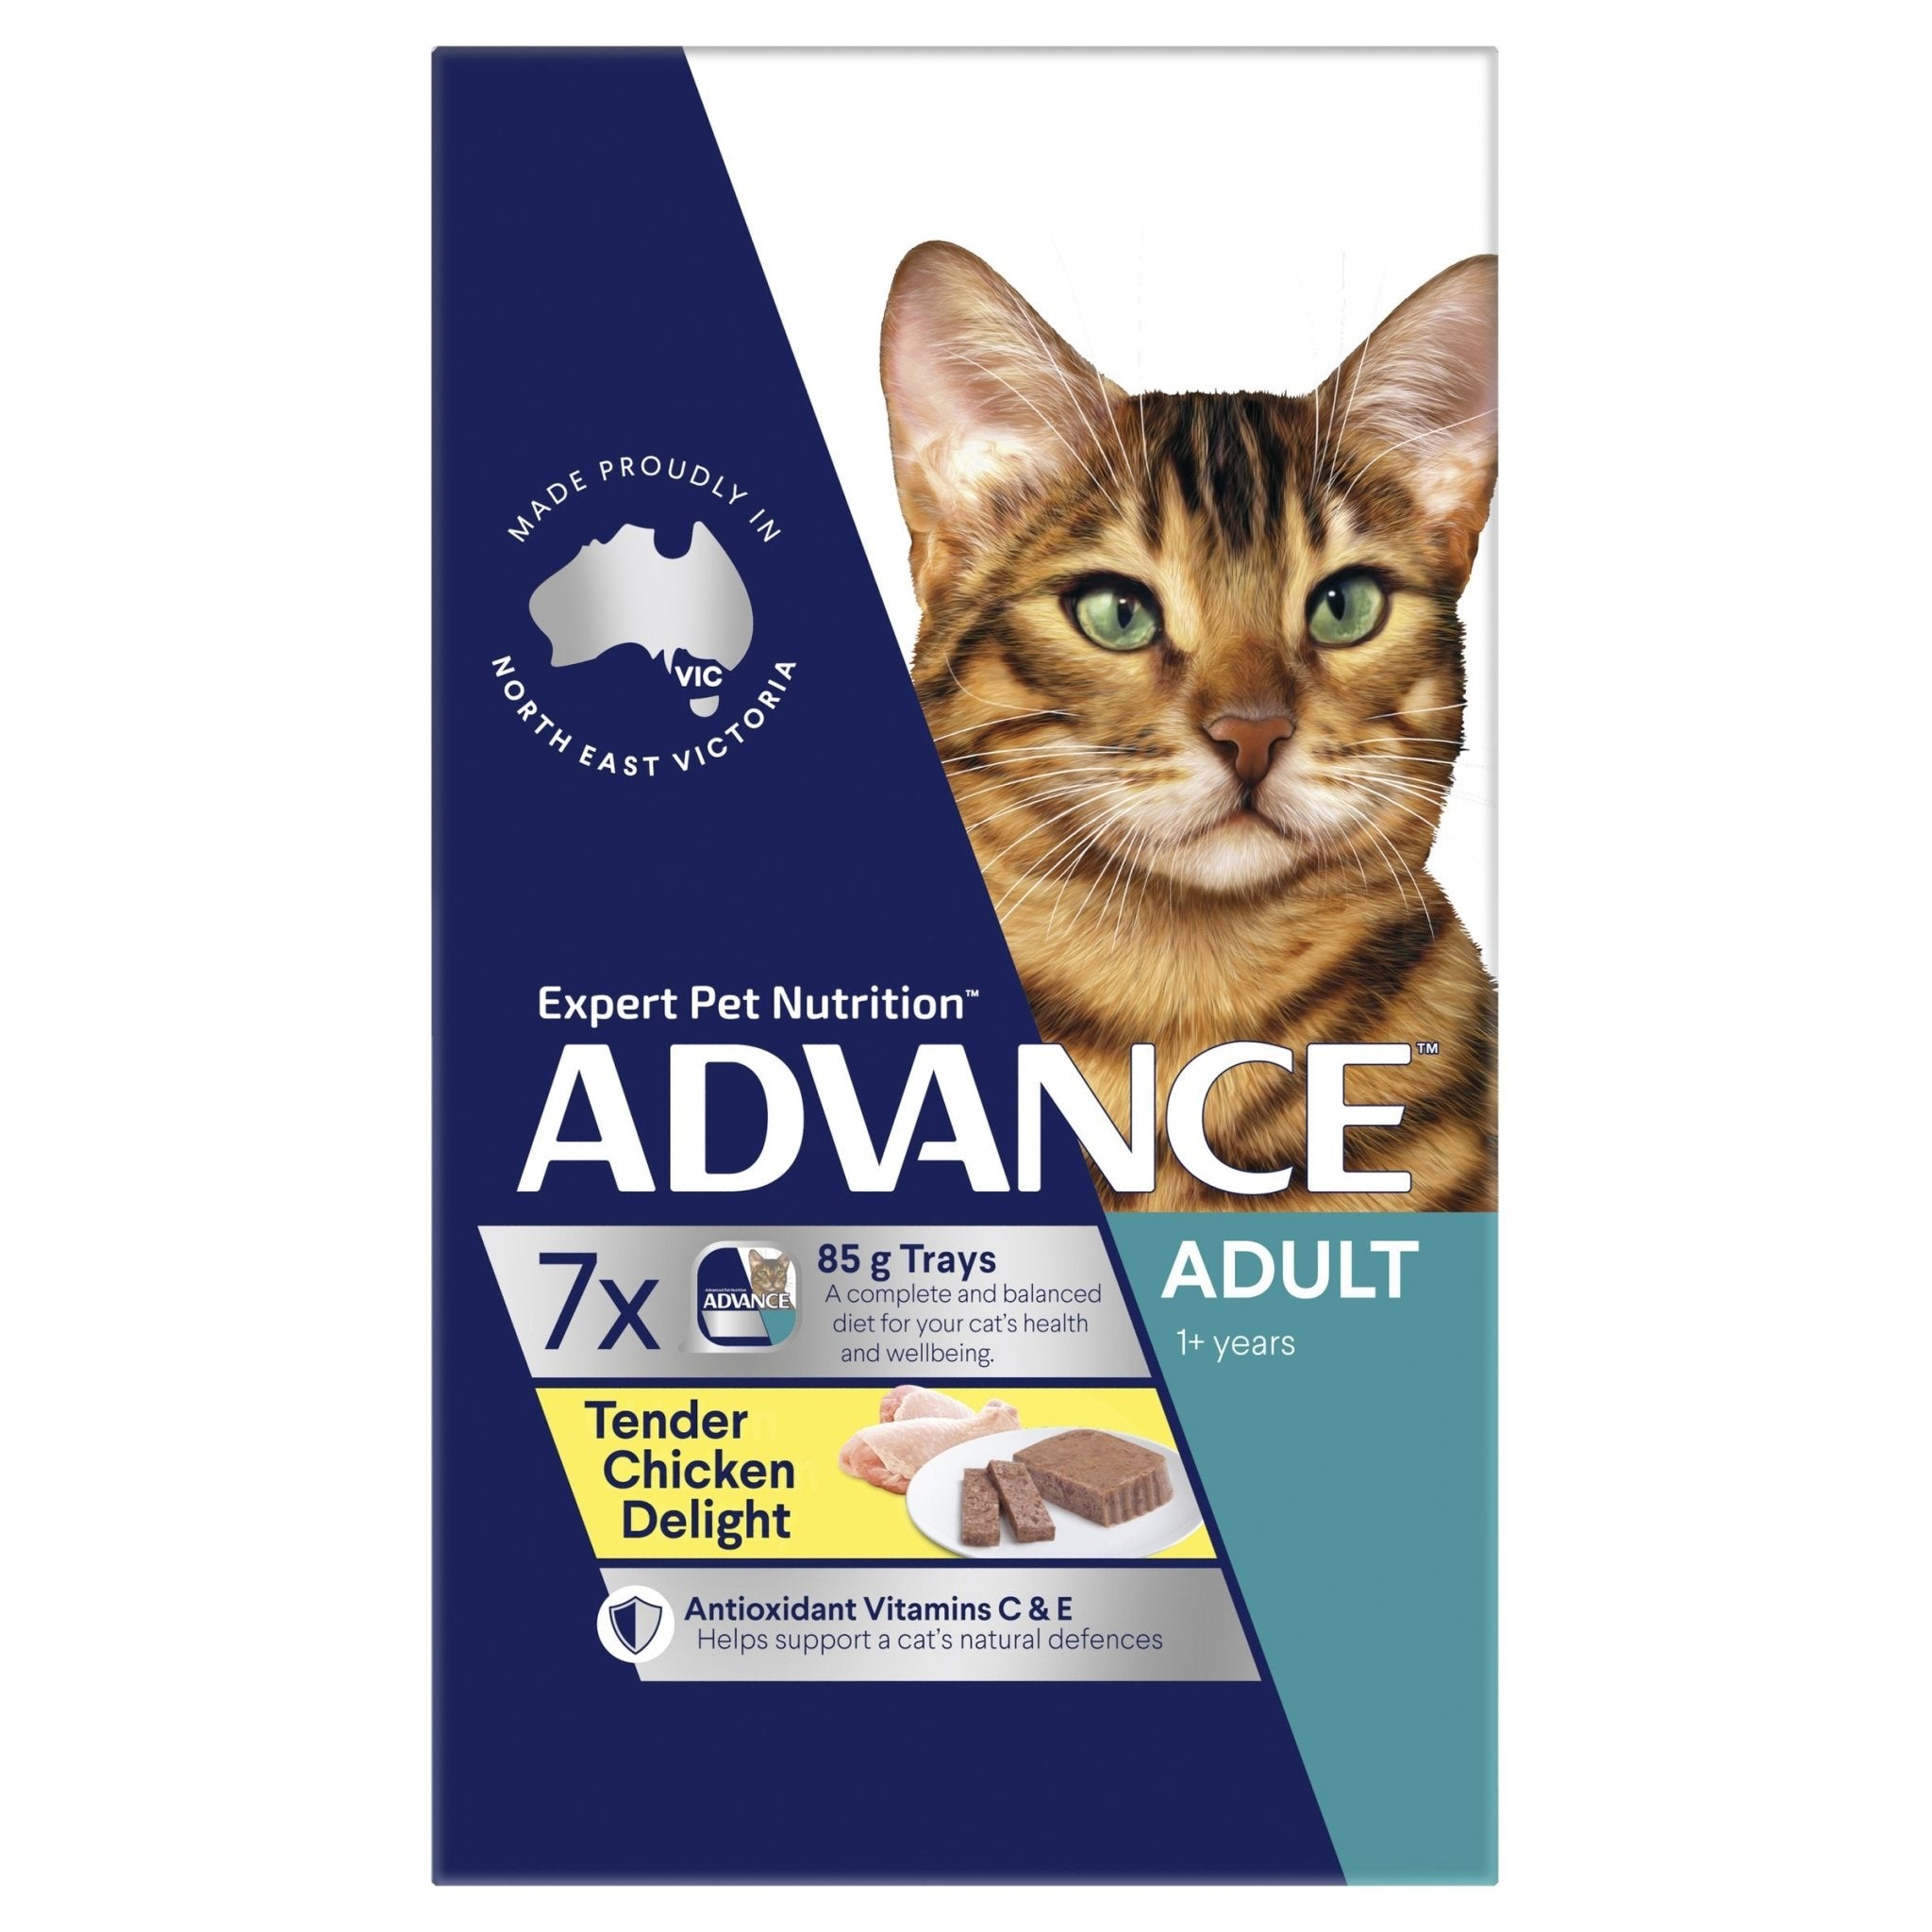 ADVANCE Adult Wet Cat Food Tender Chicken Delight 7x85g Trays